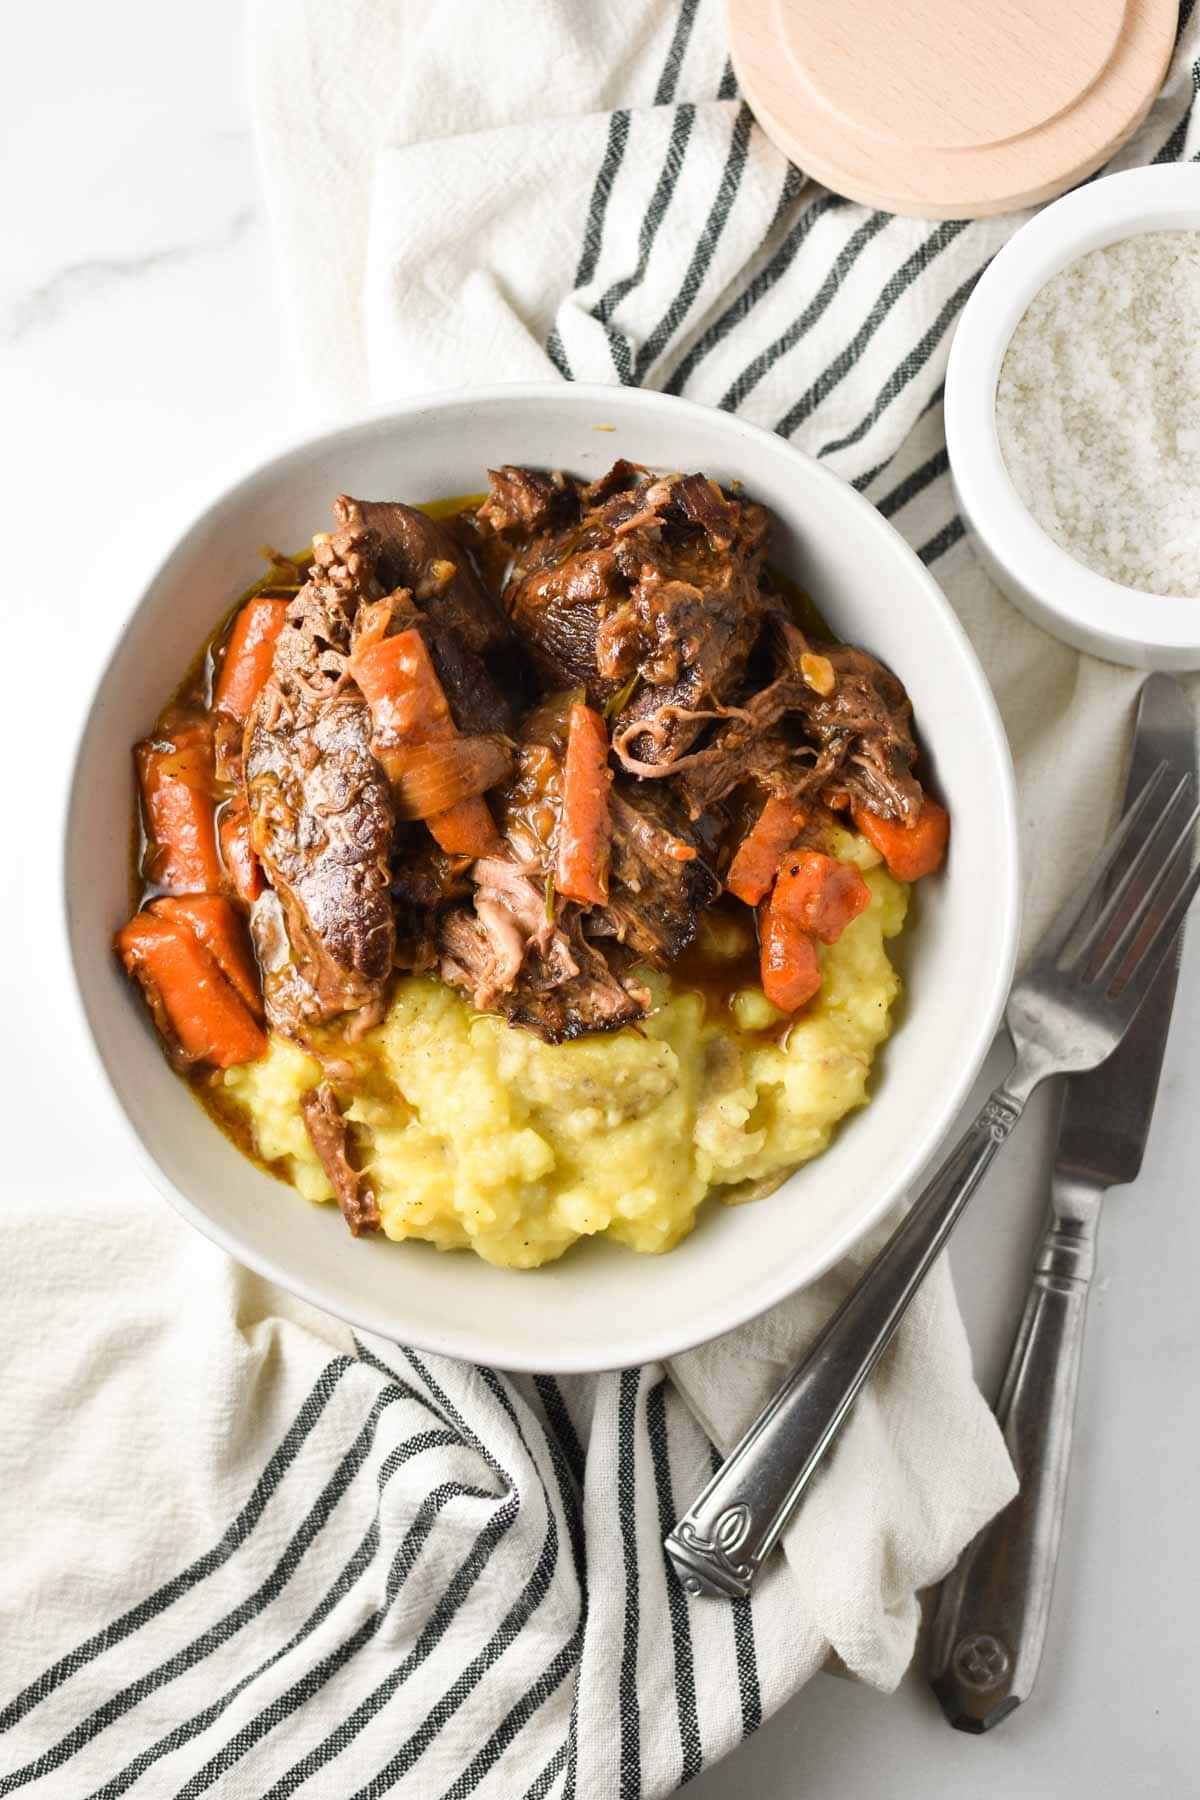 Pot roast with carrots in a bowl with mashed potatoes.